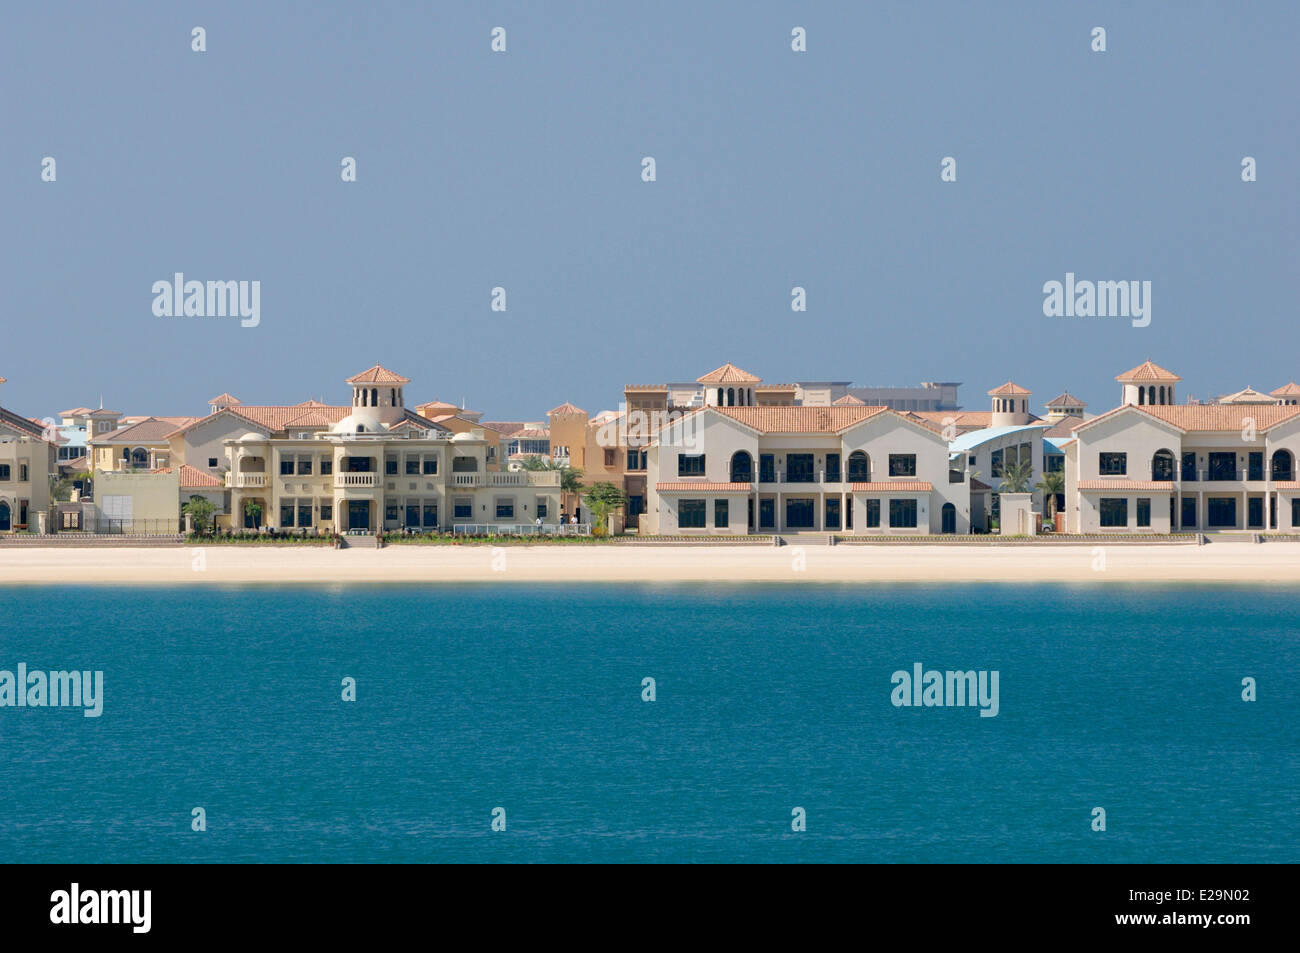 United Arab Emirates, Dubai emirate, Jumeirah, houses at the waterfront calles water homes on the artificial island palm shaped Stock Photo